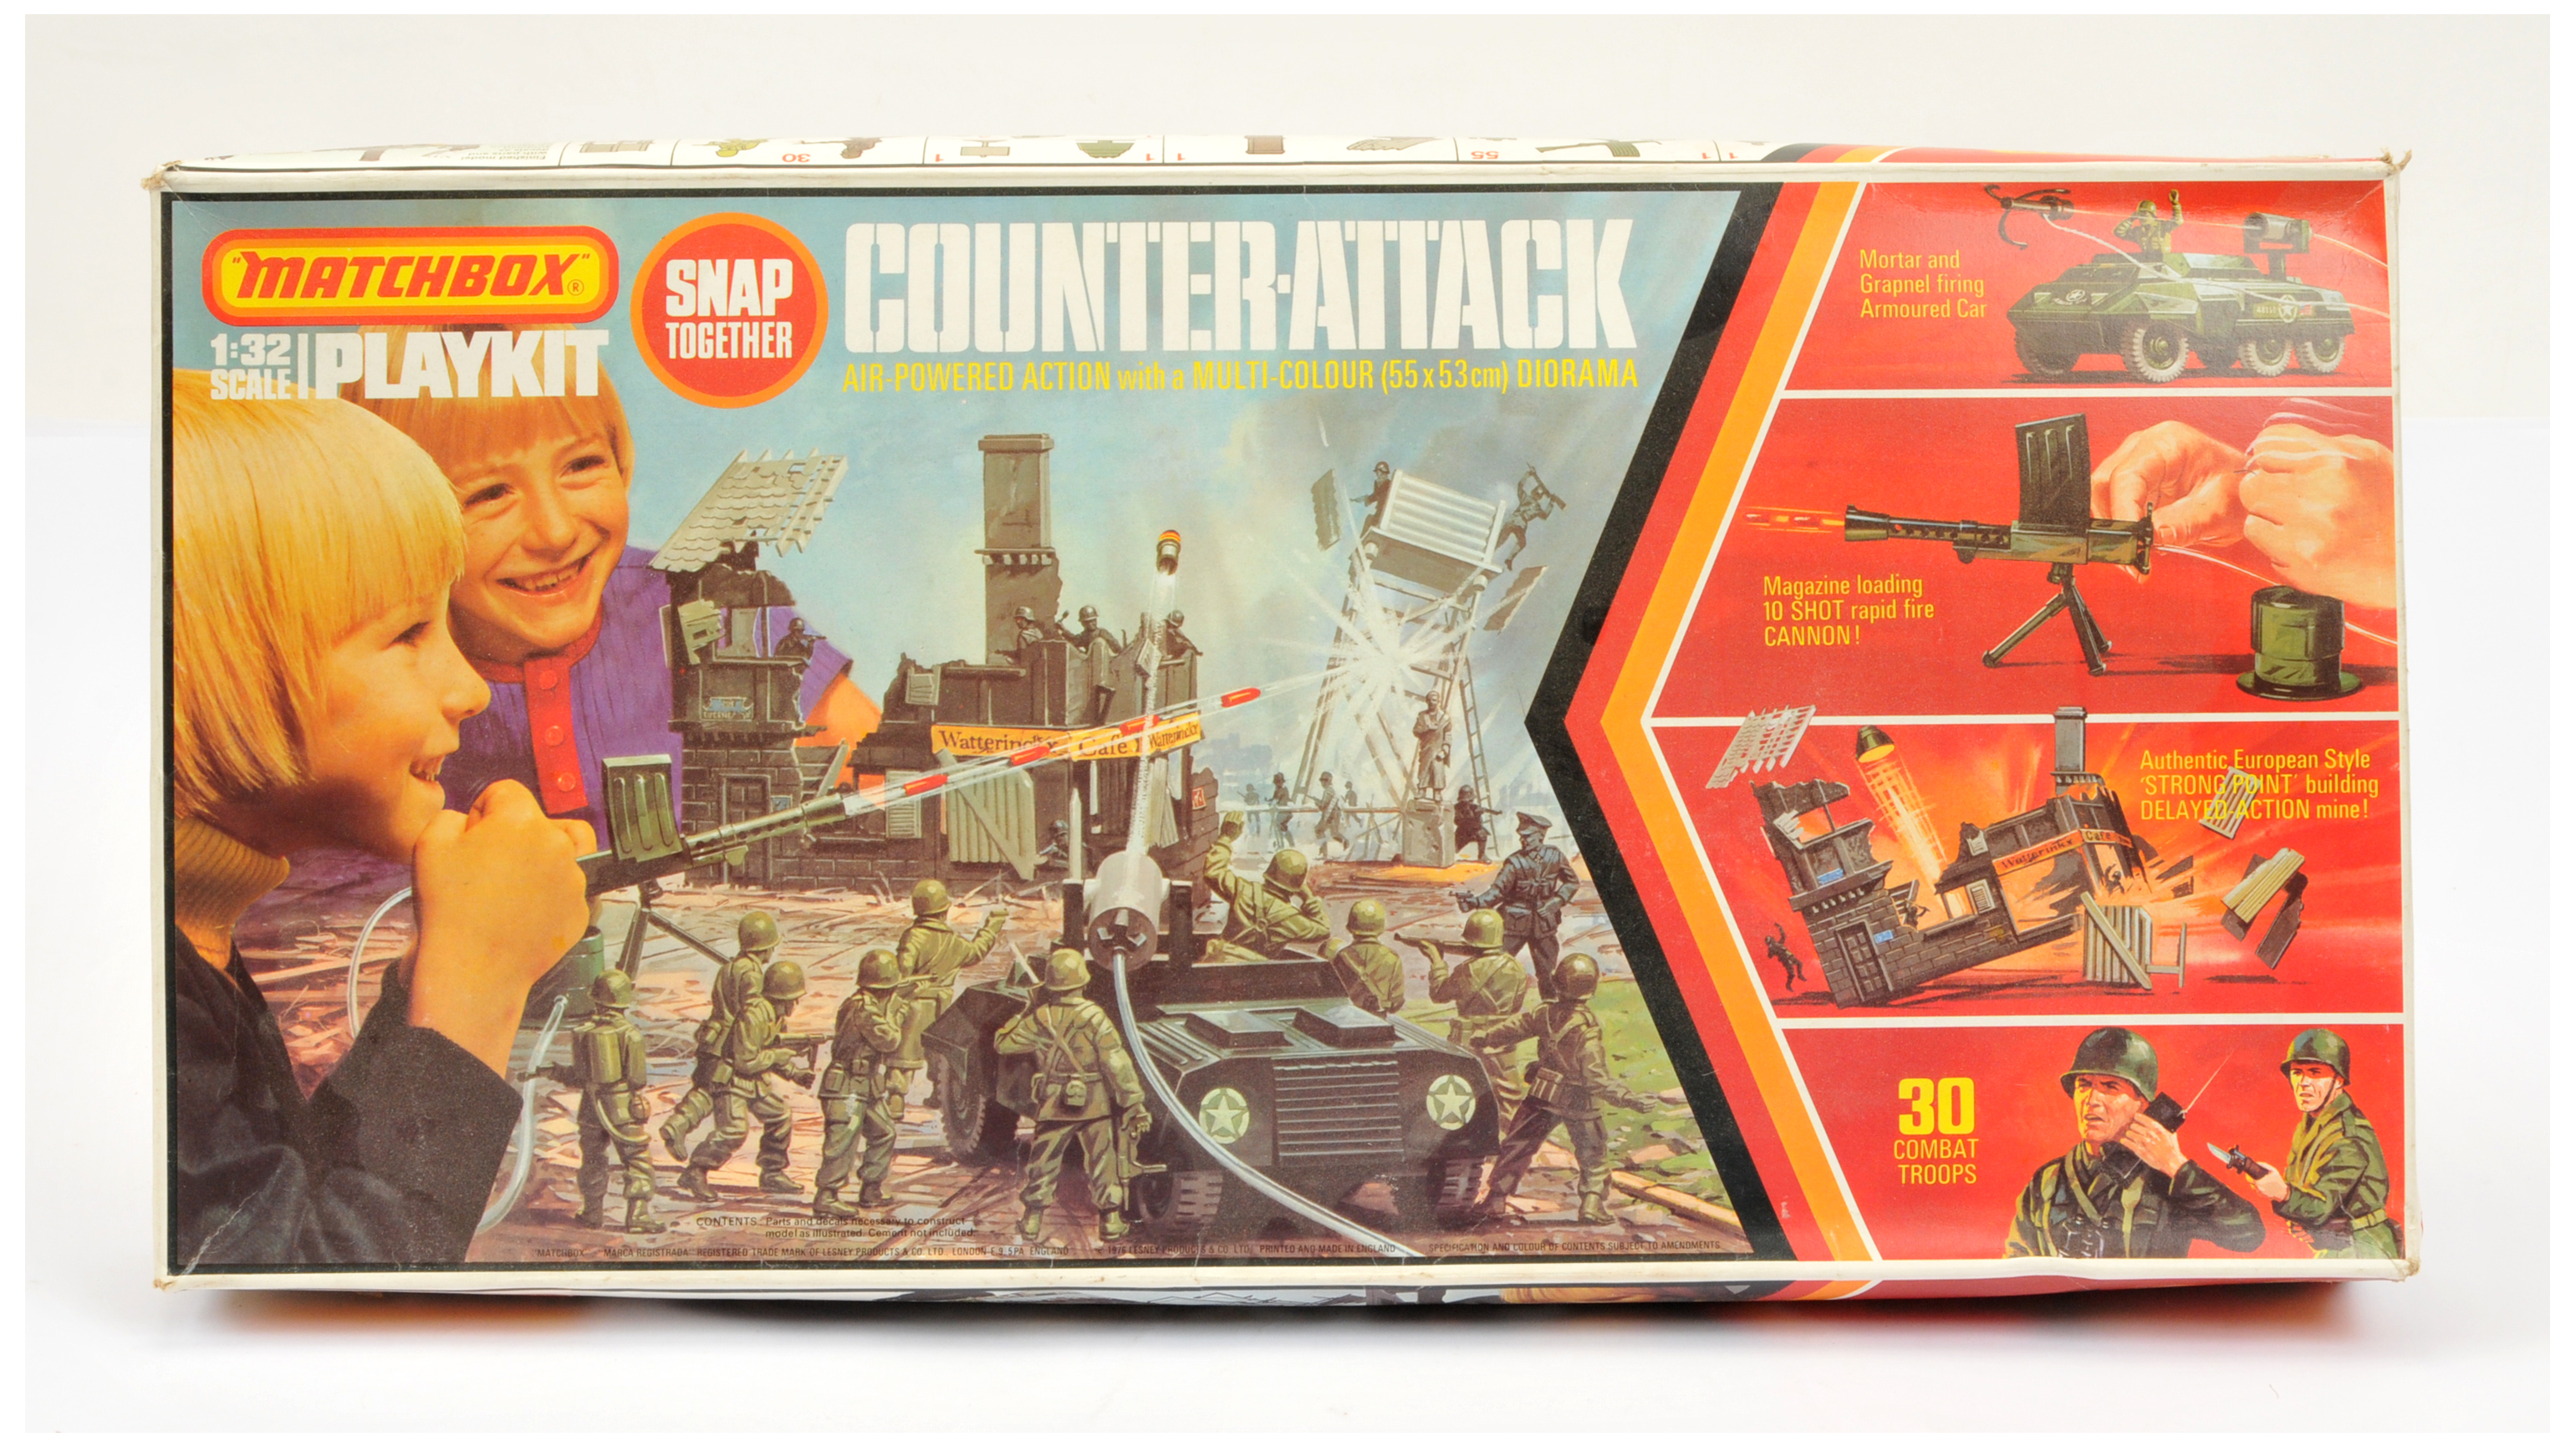 Matchbox PK1001 "Counter-Attack" 1/32nd scale plastic snap together playkit - comprising of vario...